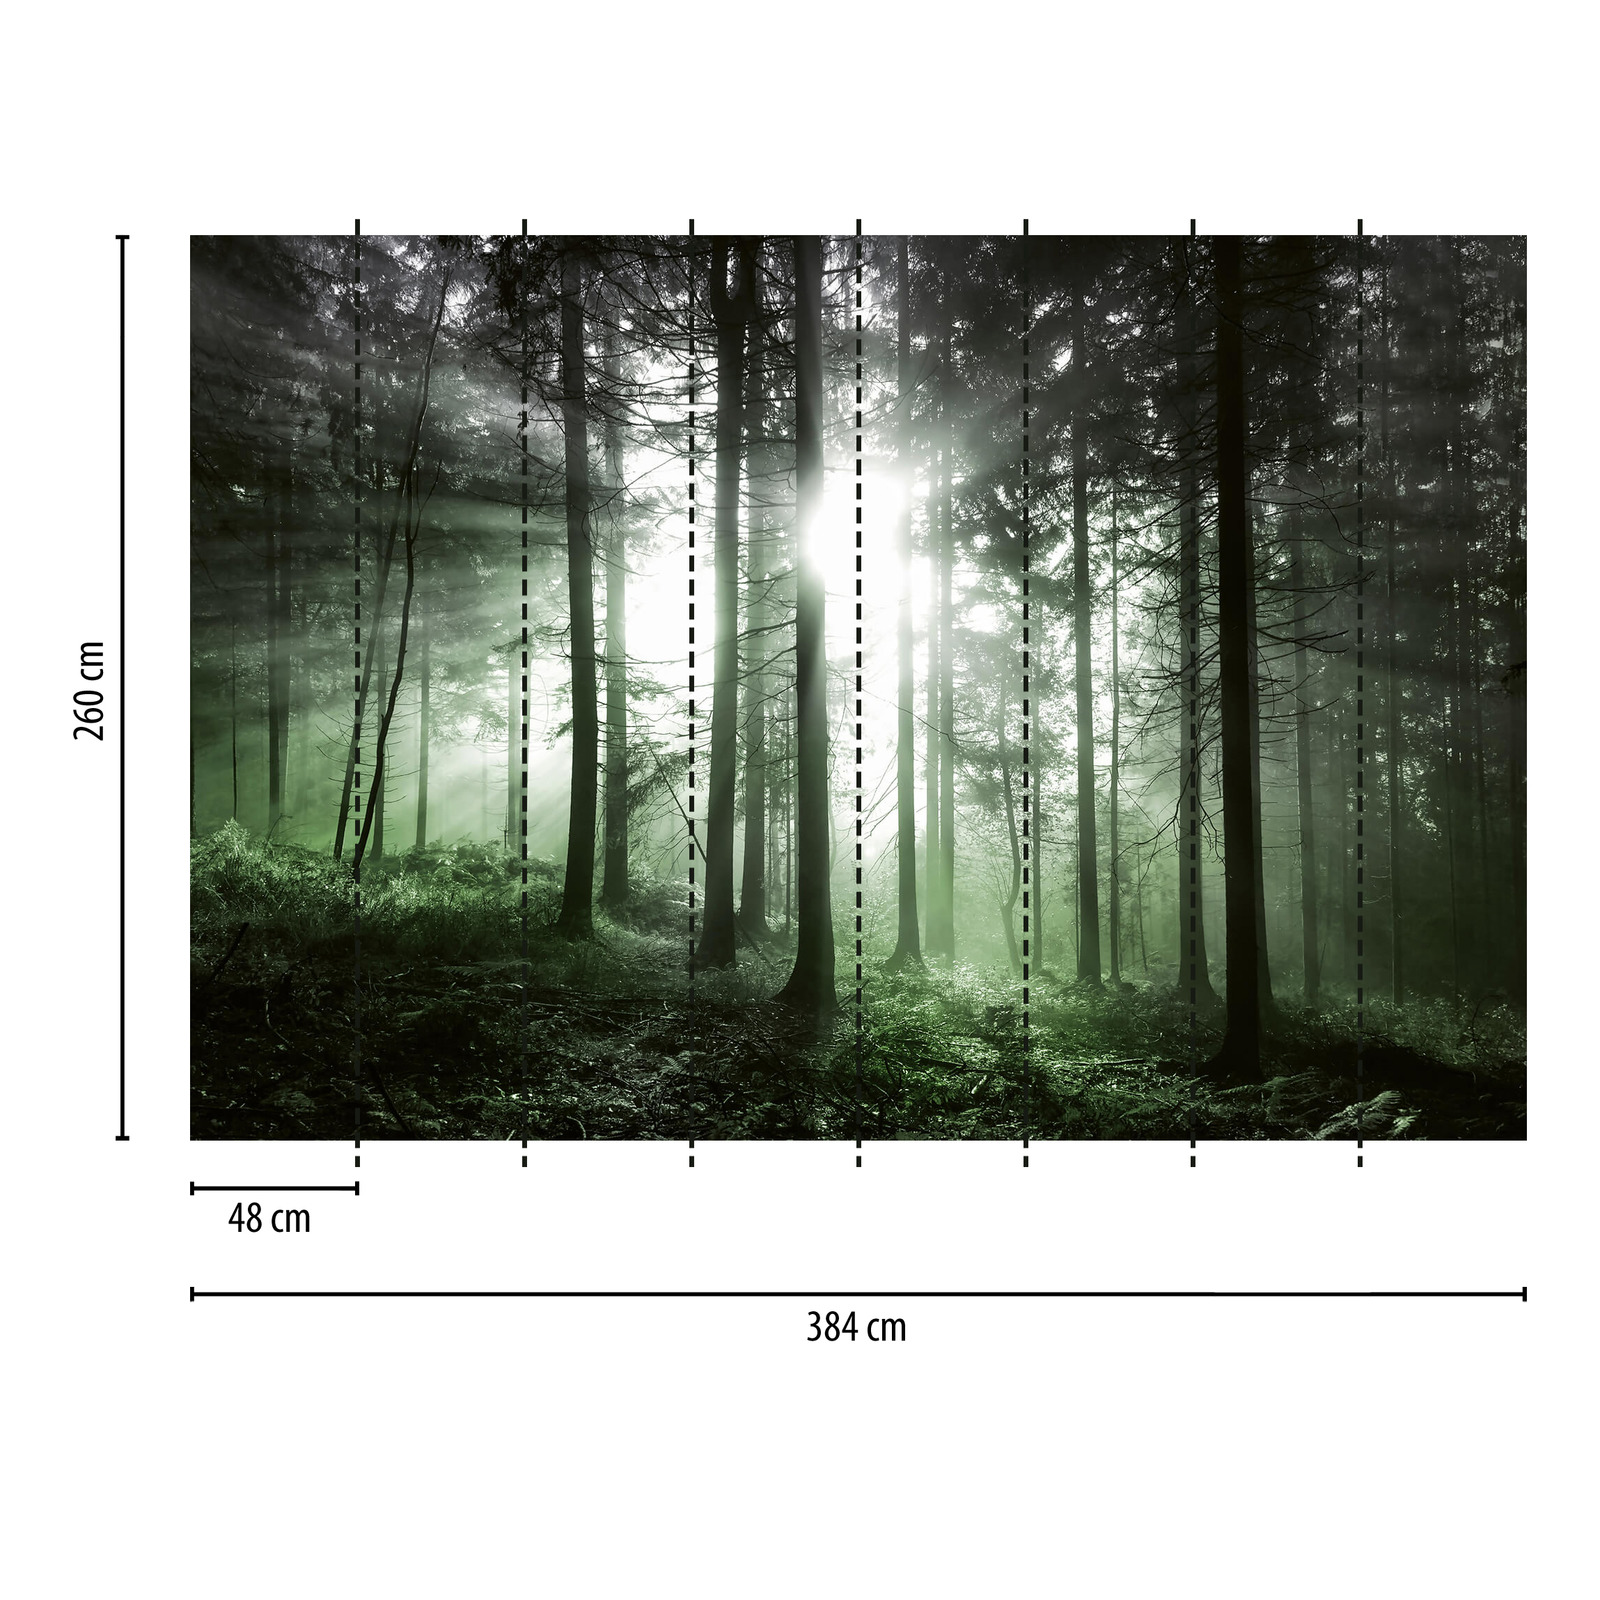             Photo wallpaper forest with light incidence - green, black, white
        